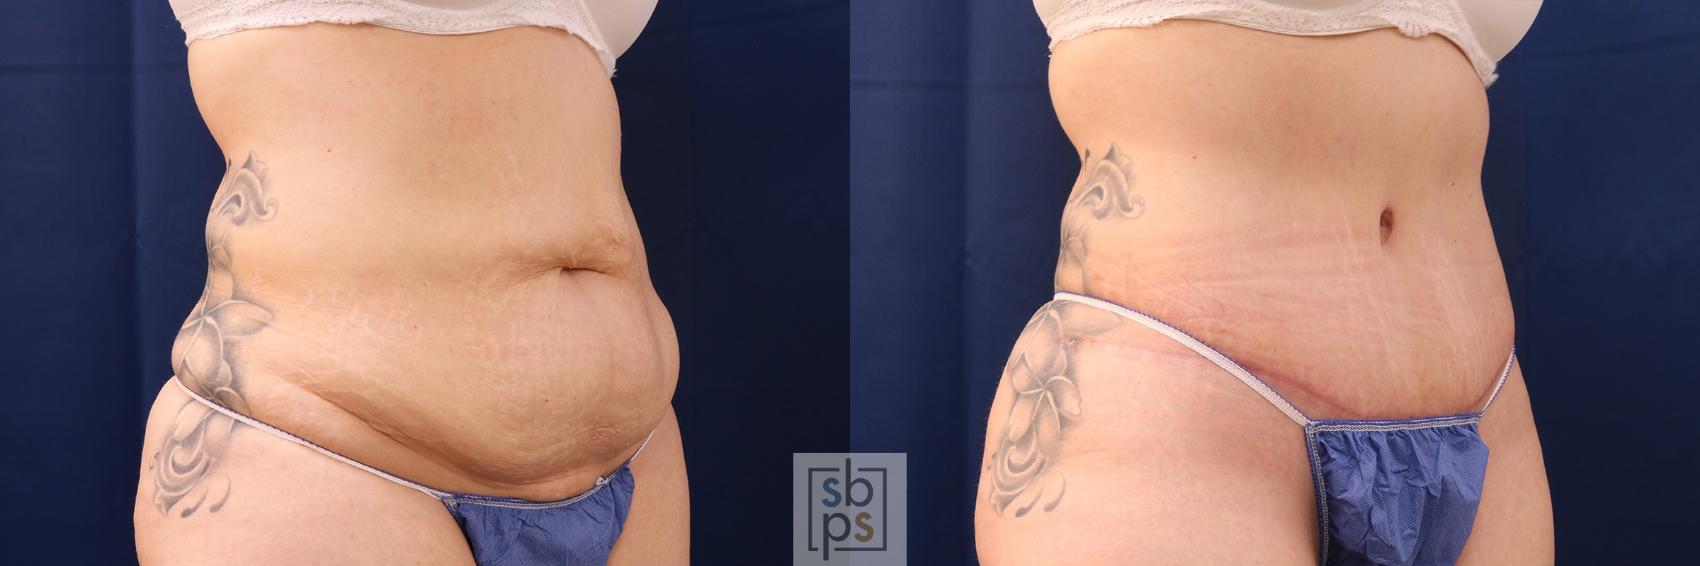 Before & After Tummy Tuck Case 575 Left Oblique View in Torrance, CA